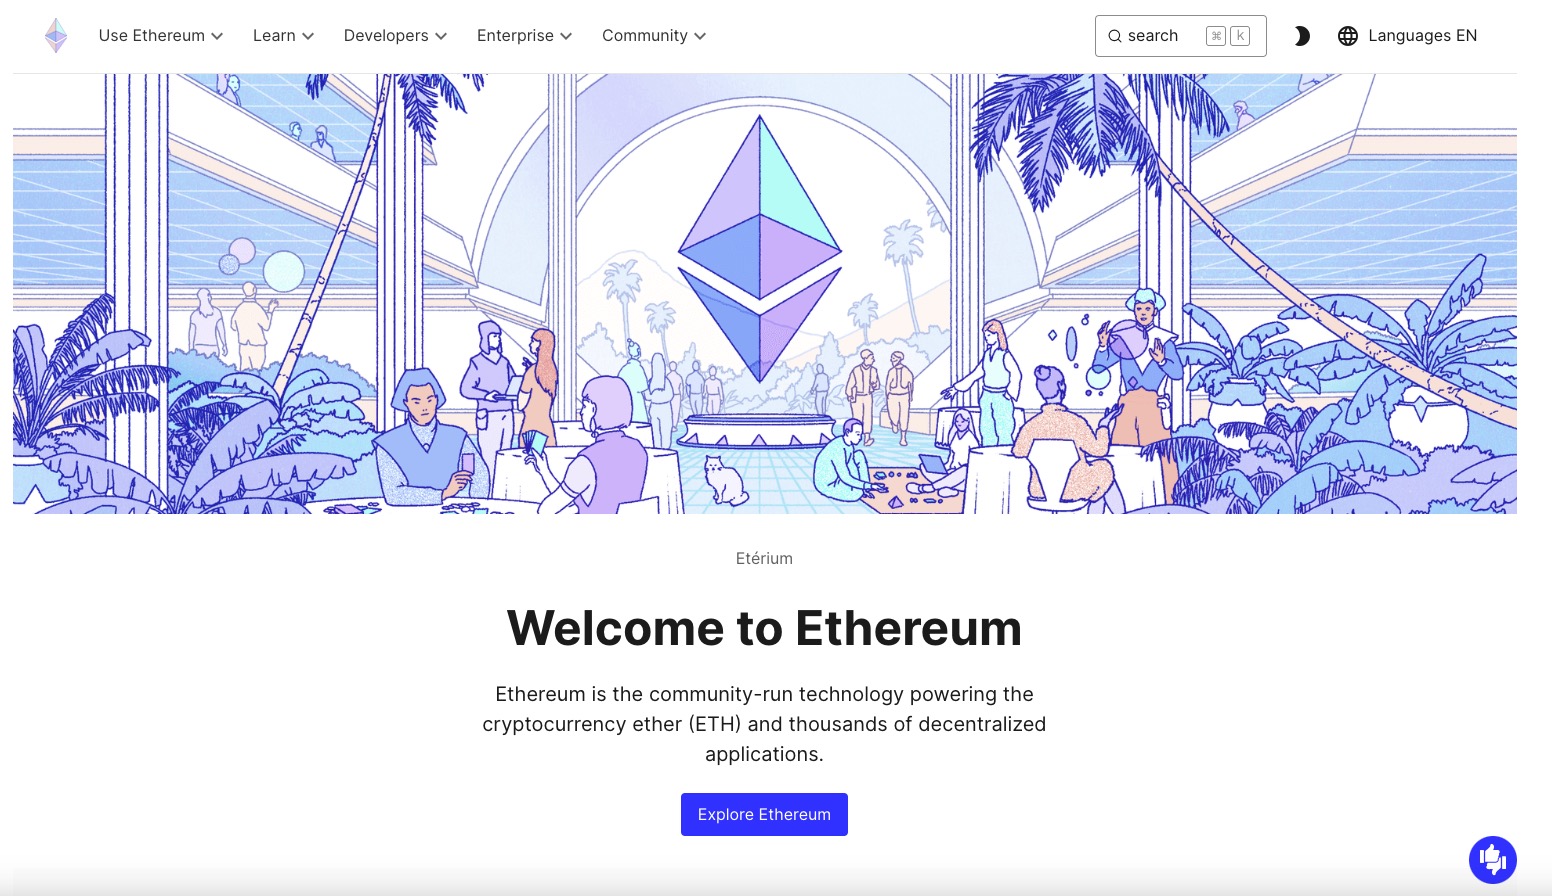 Direct access to Ethereum